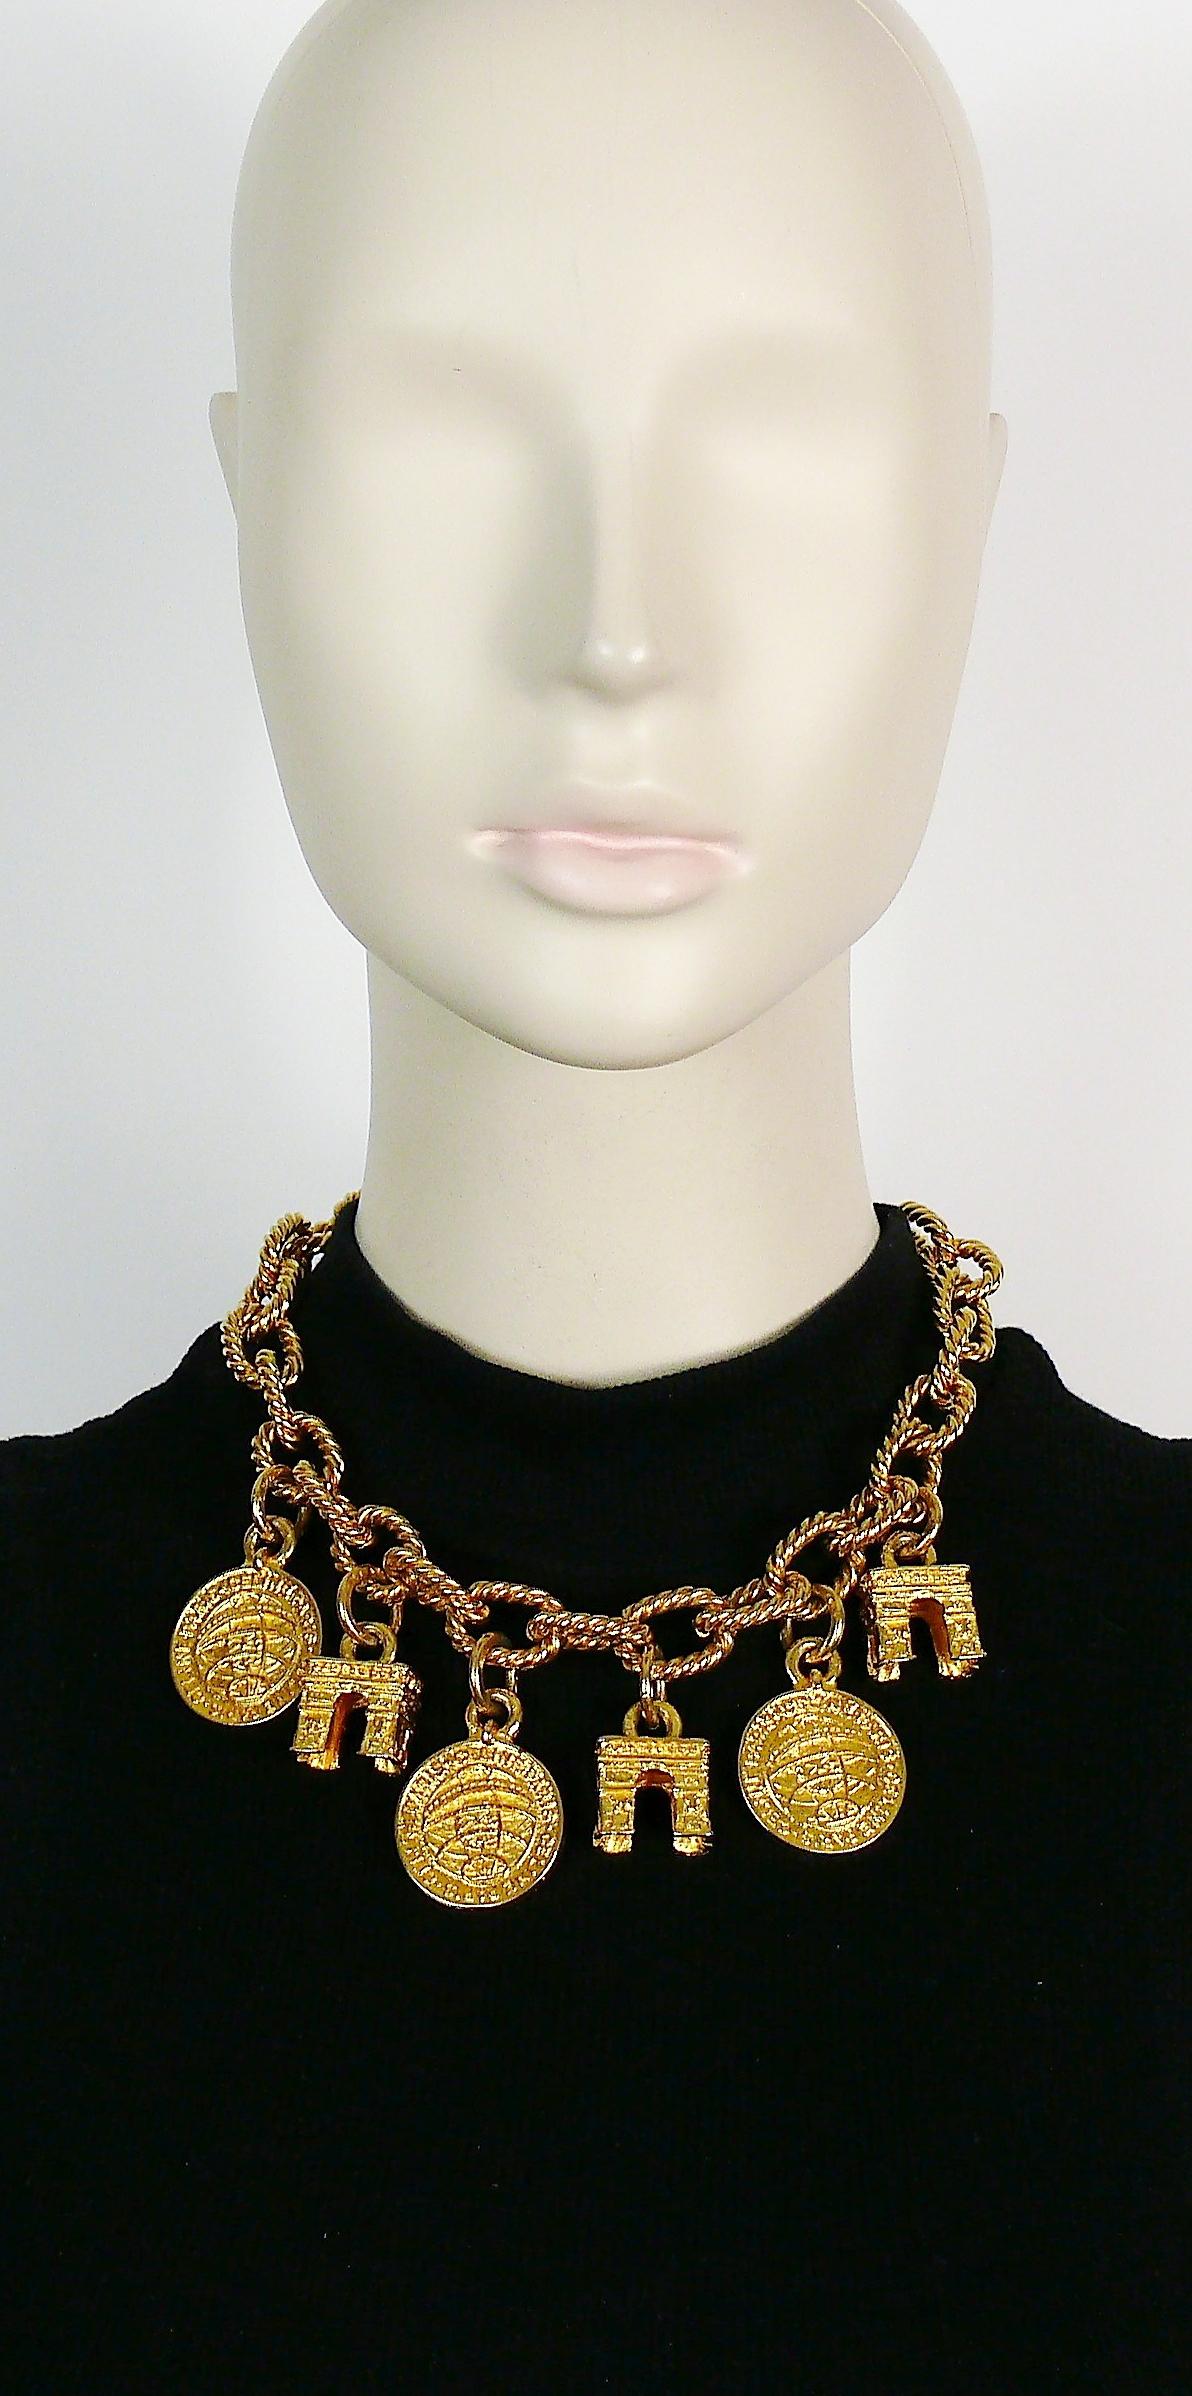 CELINE vintage 1991 iconic gold toned chain necklace featuring chunky links and 6 charms (planisphere coins, Arc de Triomphe).

T-bar and toggle clasp closure.

Embossed CELINE PARIS.
Made in Italy 91.

Indicative measurements : wearable length